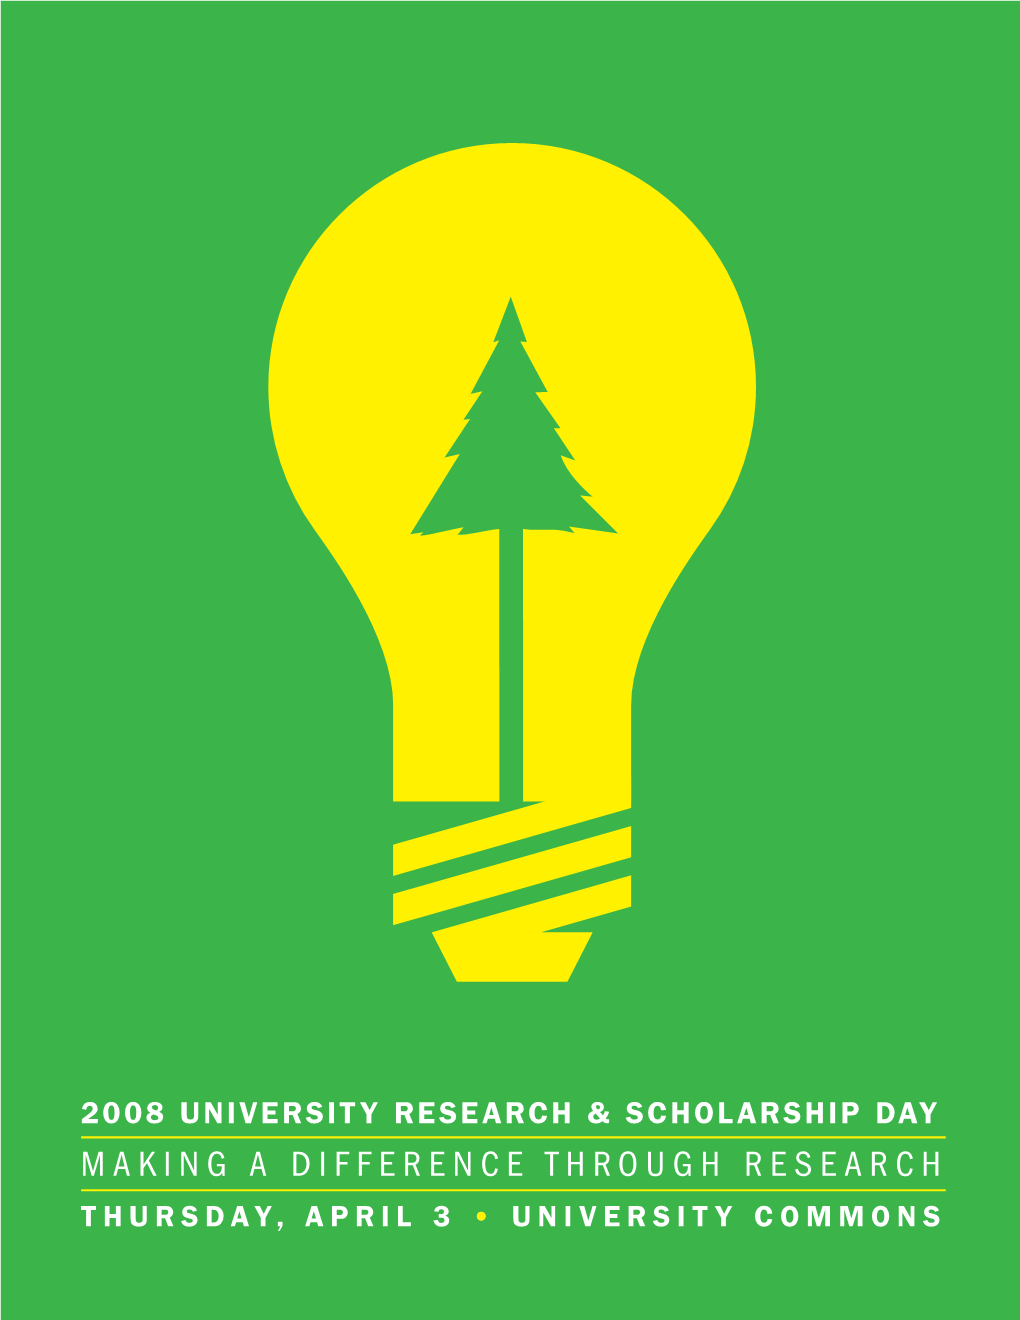 University Research and Scholarship Day 2008 Program